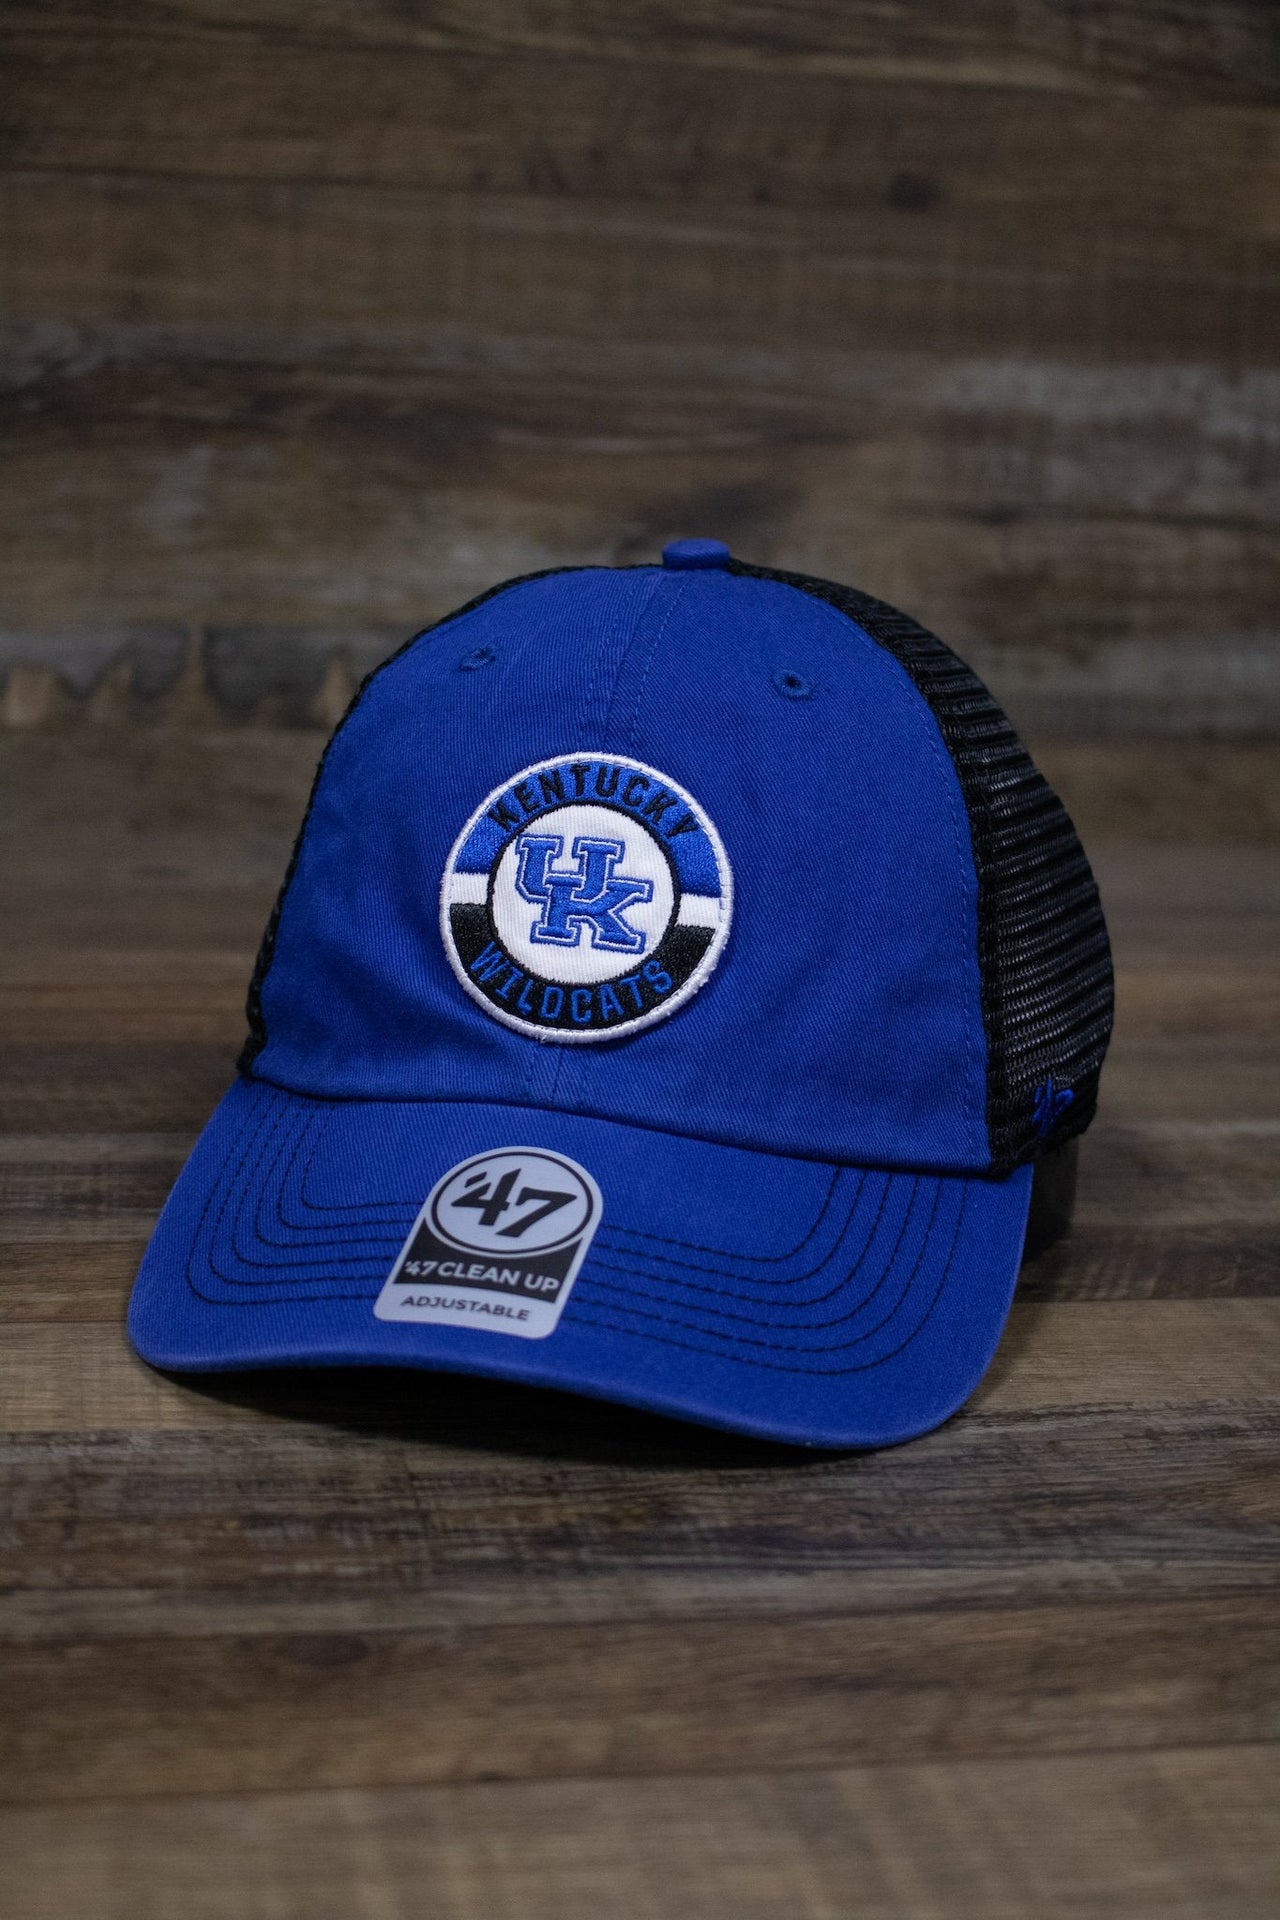 On the front of the Kentucky Wildcats Mesh Back dad hat is a circular patch with the University of Kentucky logo and the words Kentucky Wildcats